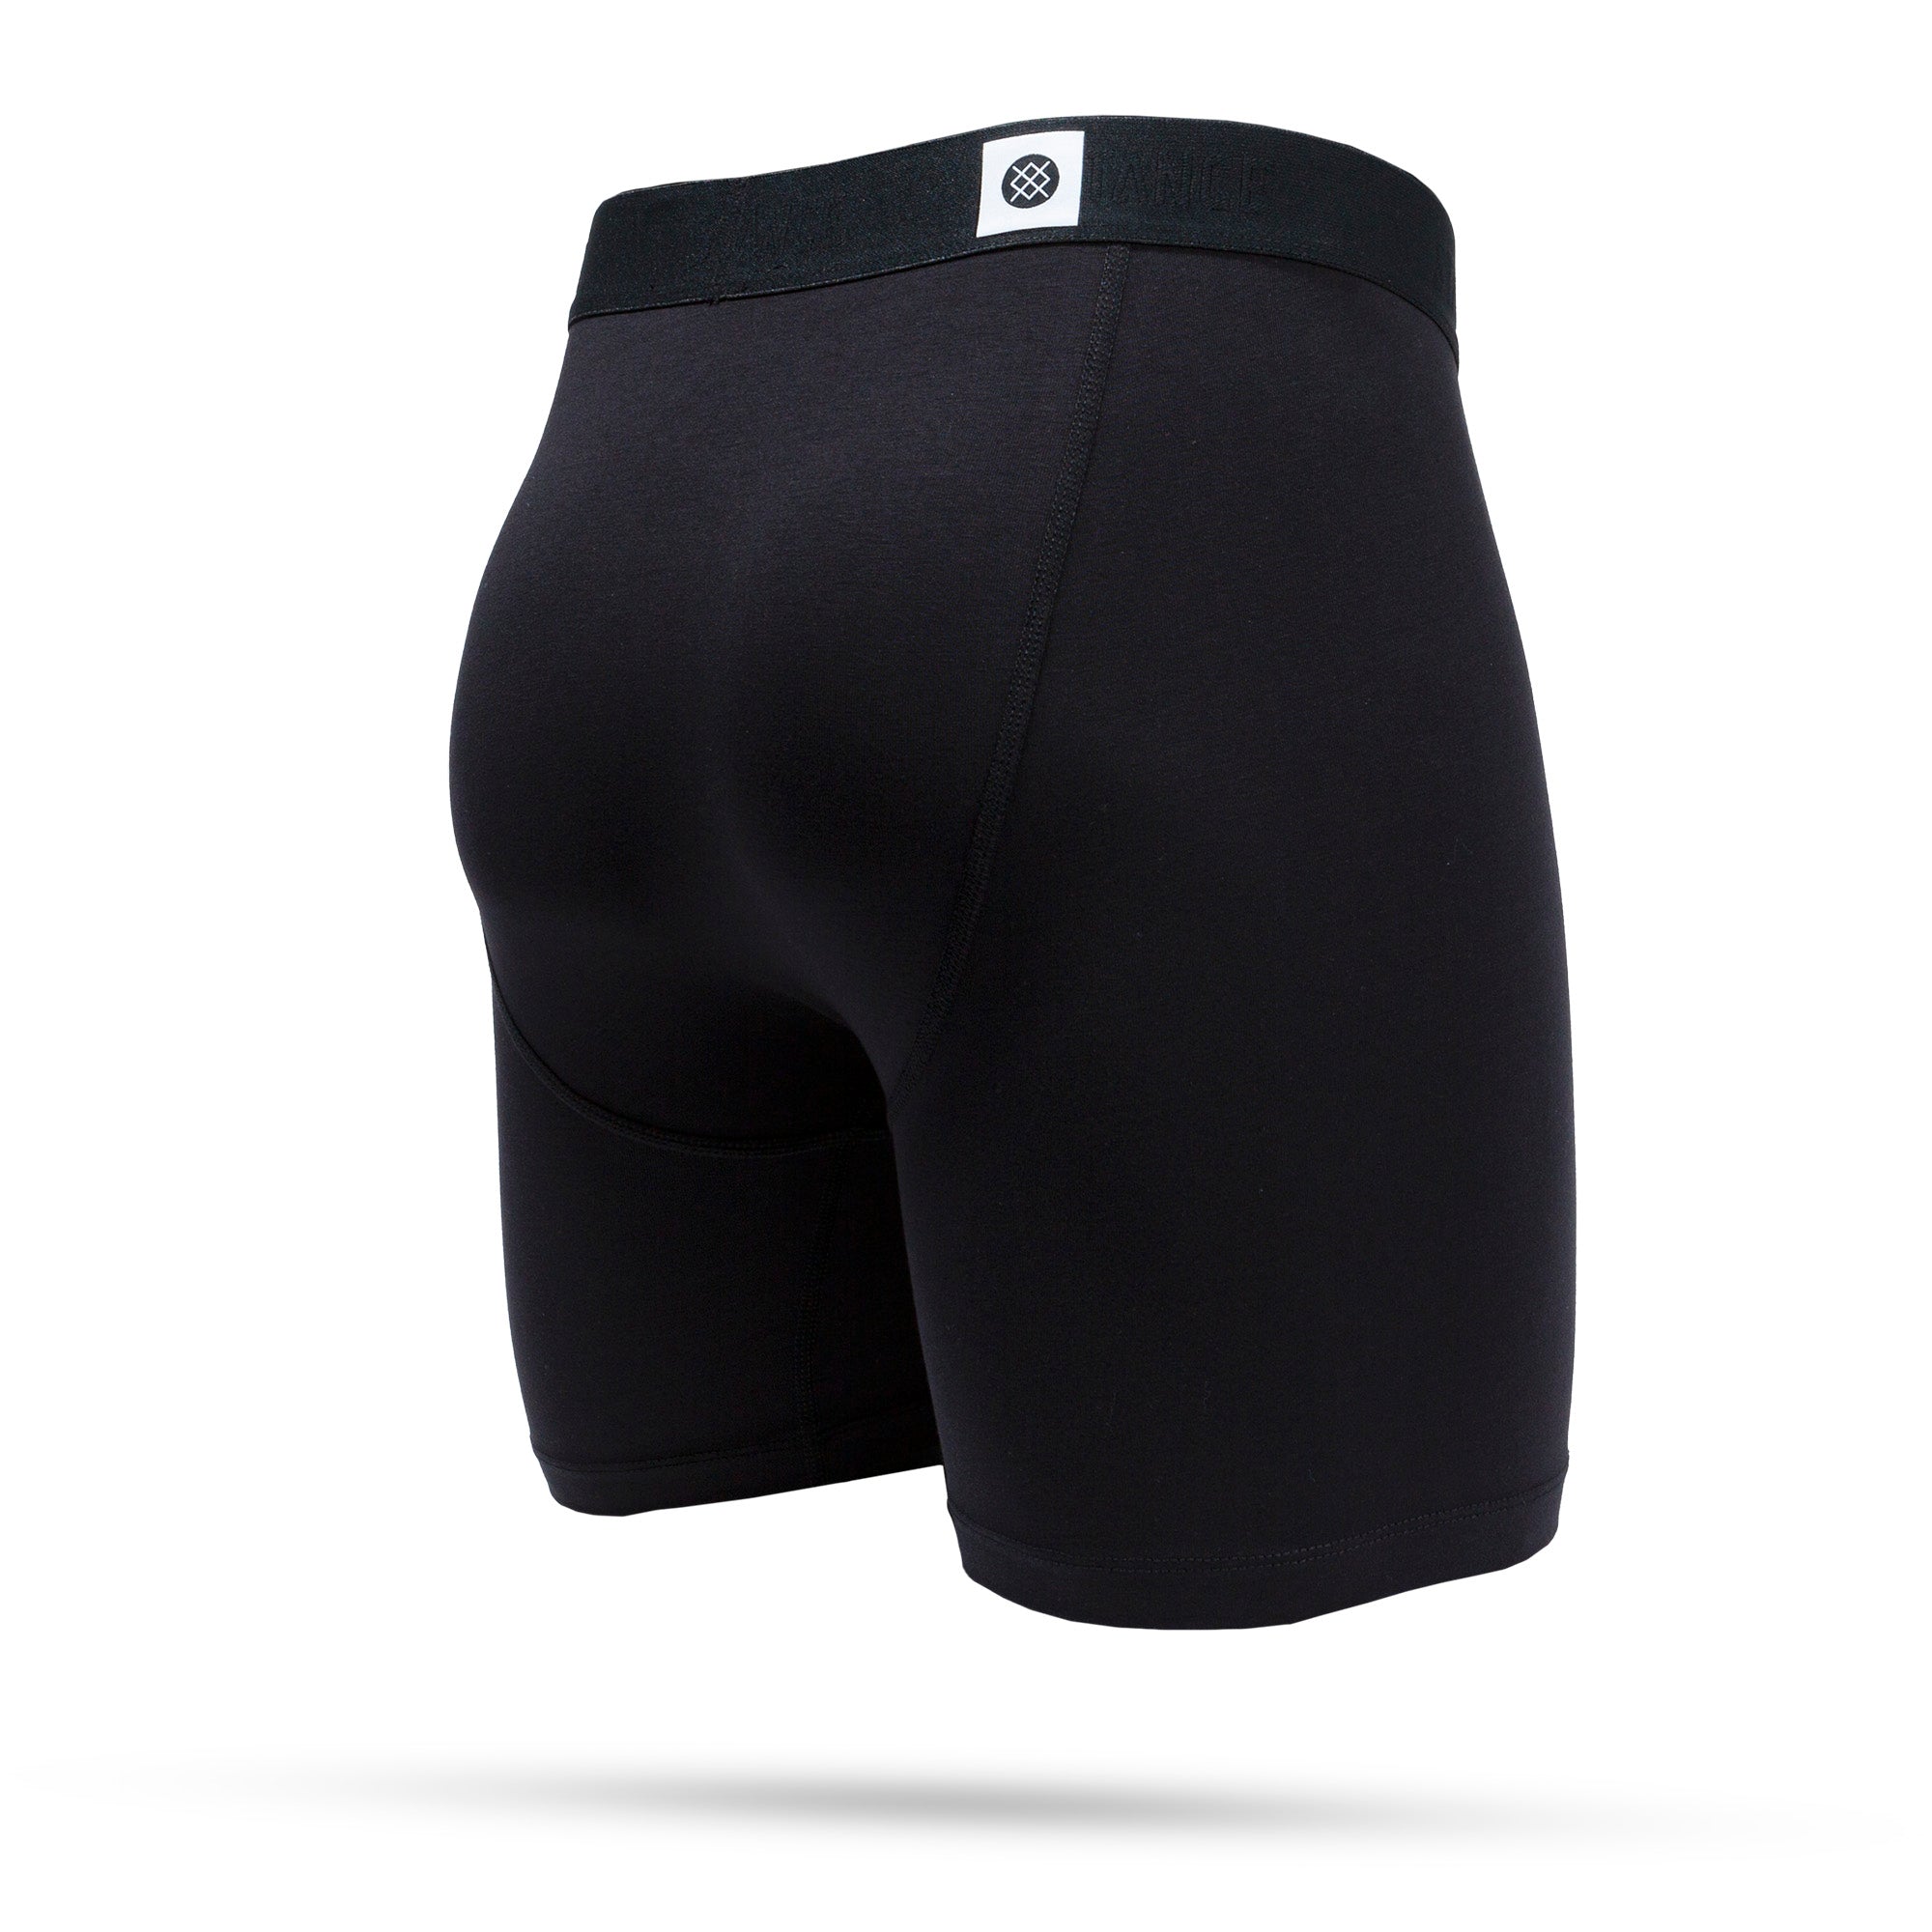 Bestselling Boxer Briefs Are on Sale for $2.21 Each - Men's